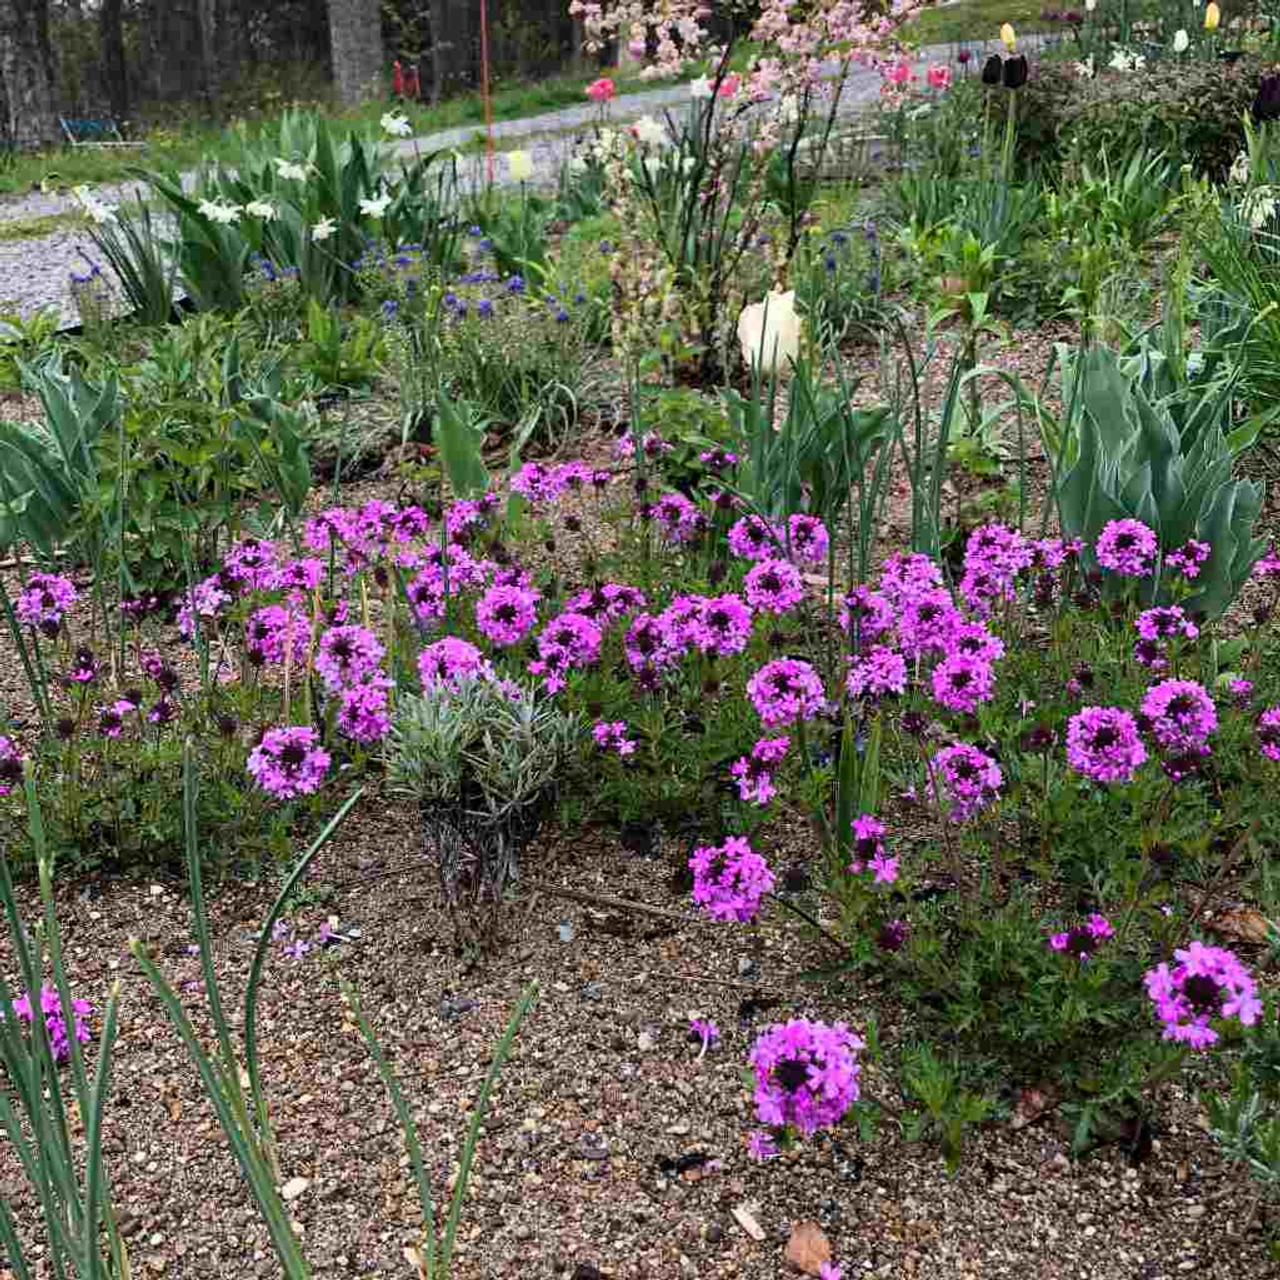 Verbena canadensis 'Anna's Pink' starts to bloom after creeping phloxes and meets with late bulbs ©US Perennials